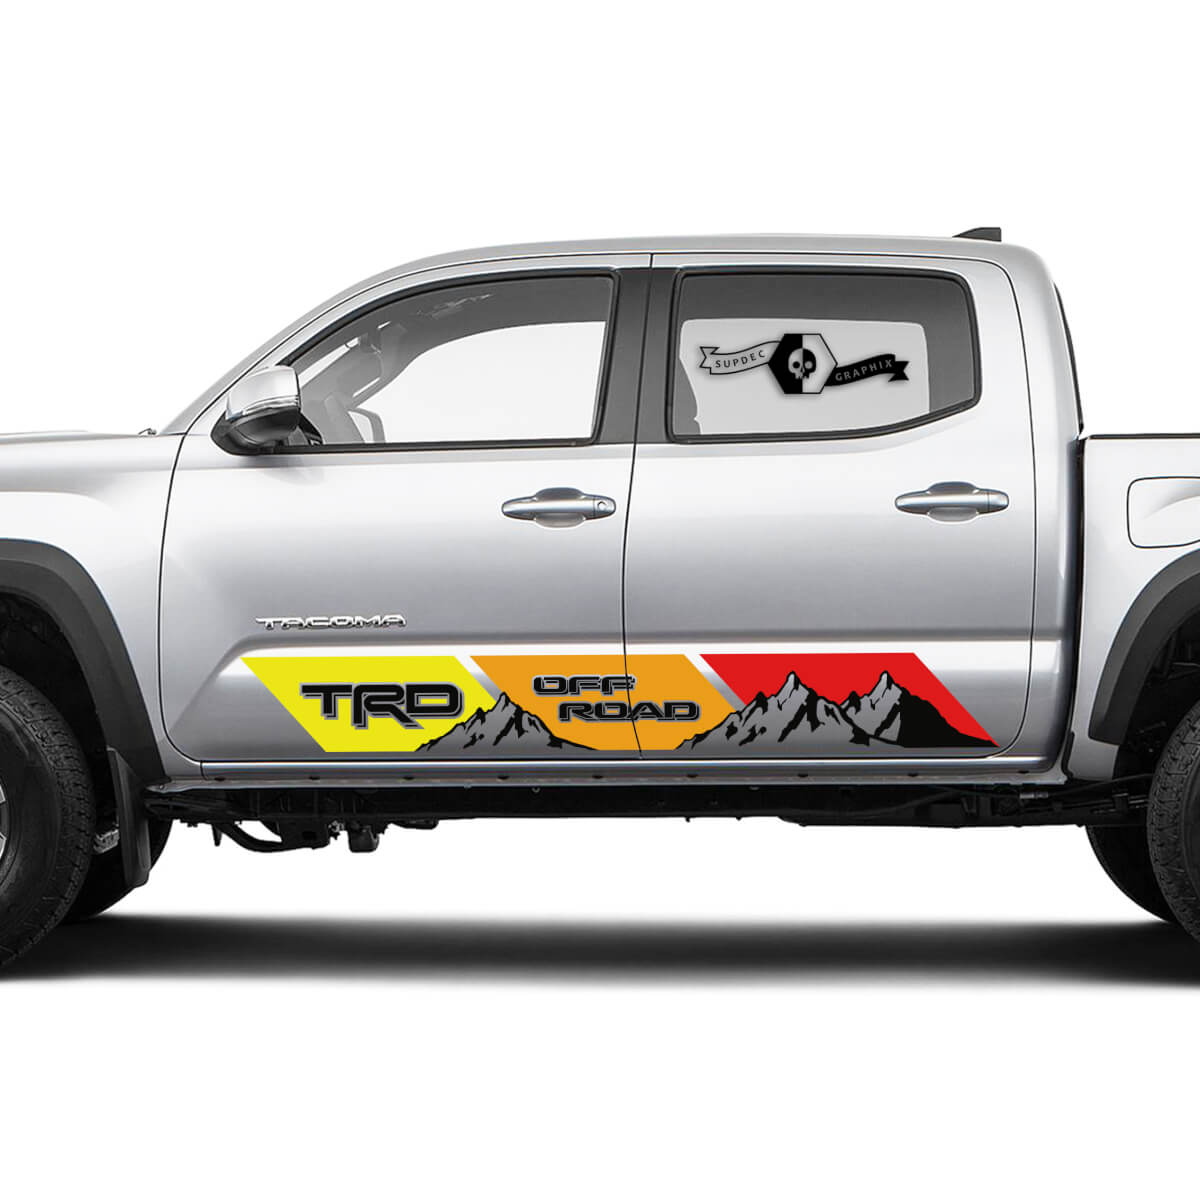 2 side TRD Off Road Rocker Panel Mountain Vinyl Stickers Vintage TOYOTA Colors Decals Stickers for Tacoma Tundra 4Runner Hilux